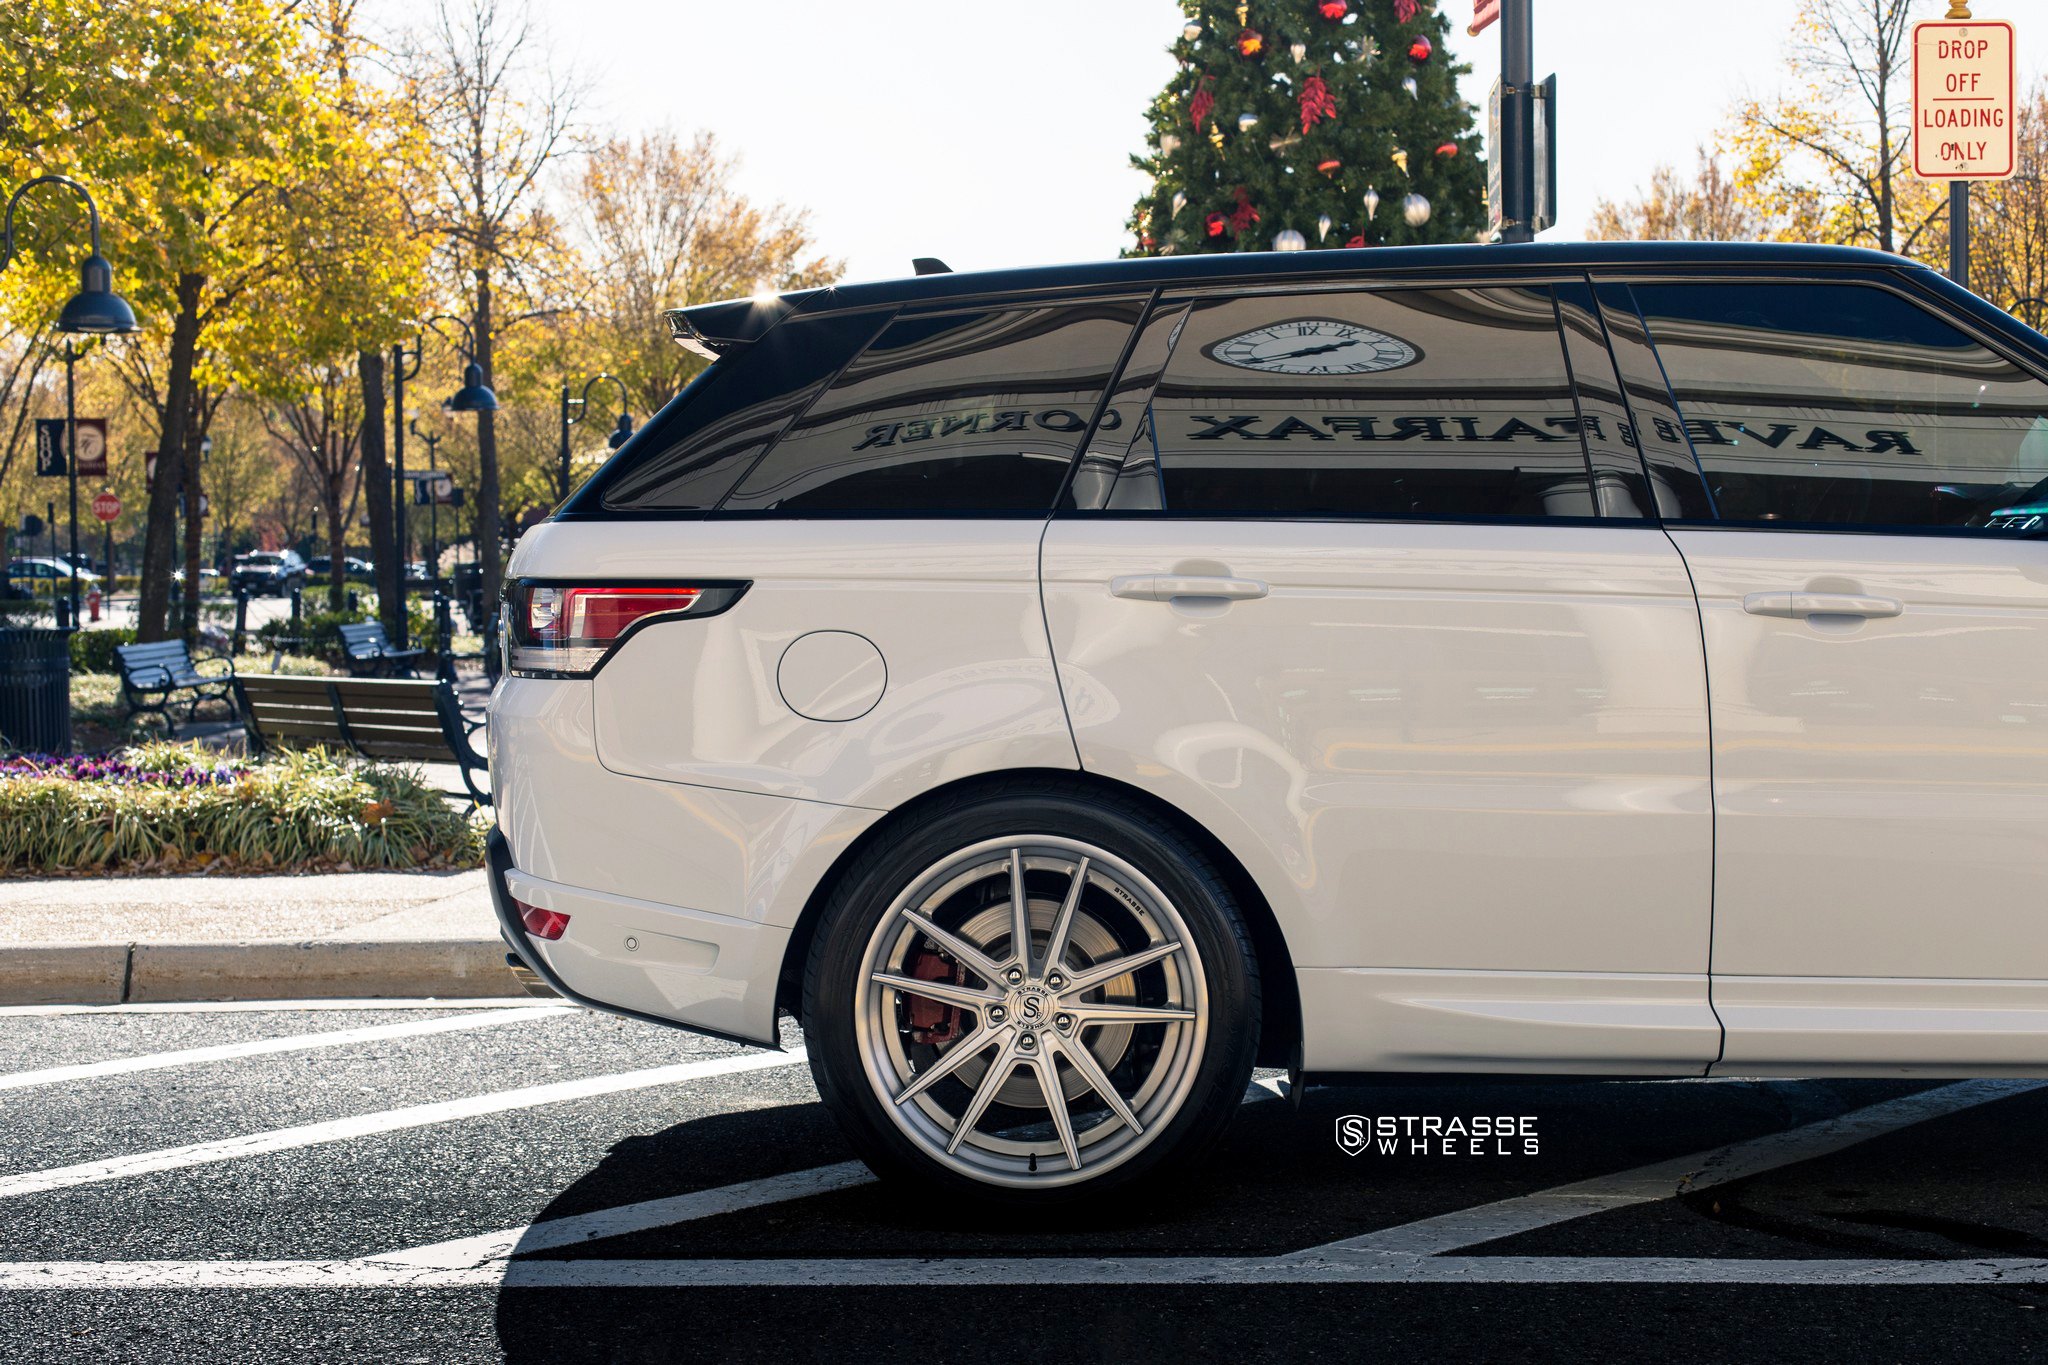 Roofline Spoiler on White Range Rover Sport - Photo by Strasse Forged